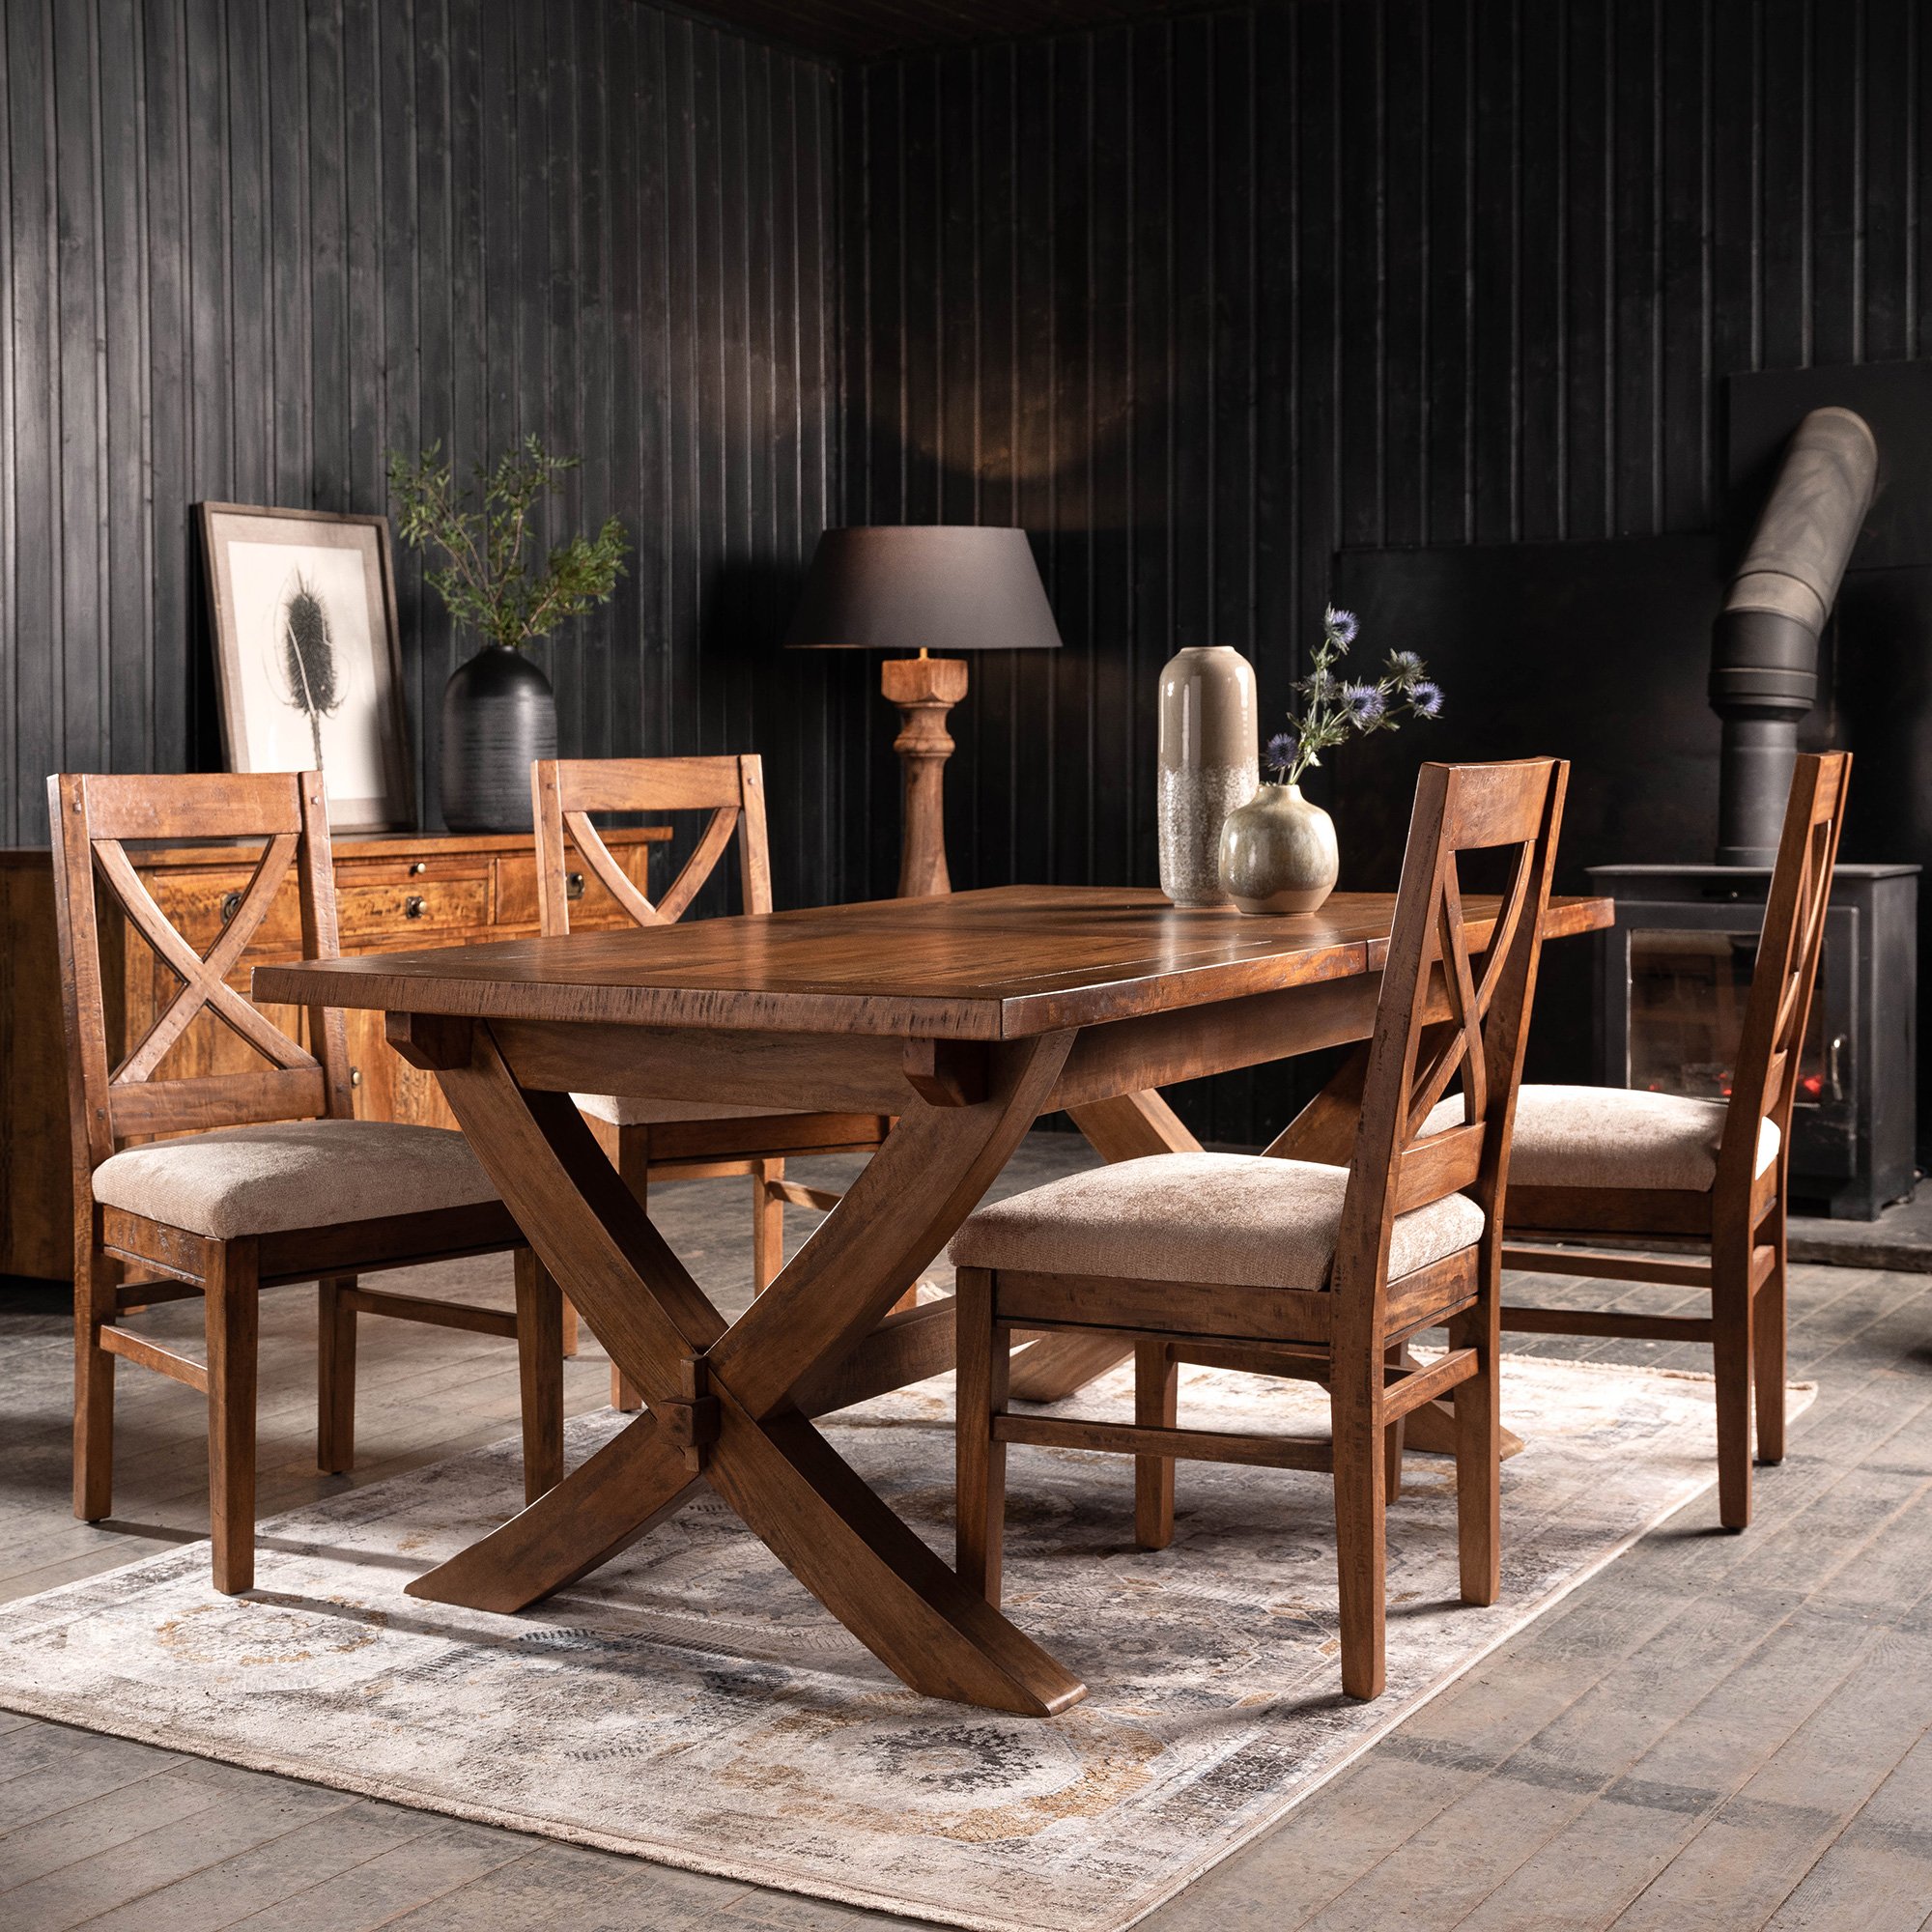 New Frontier Extending Dining Table & 4 Chairs, Brown | Barker & Stonehouse